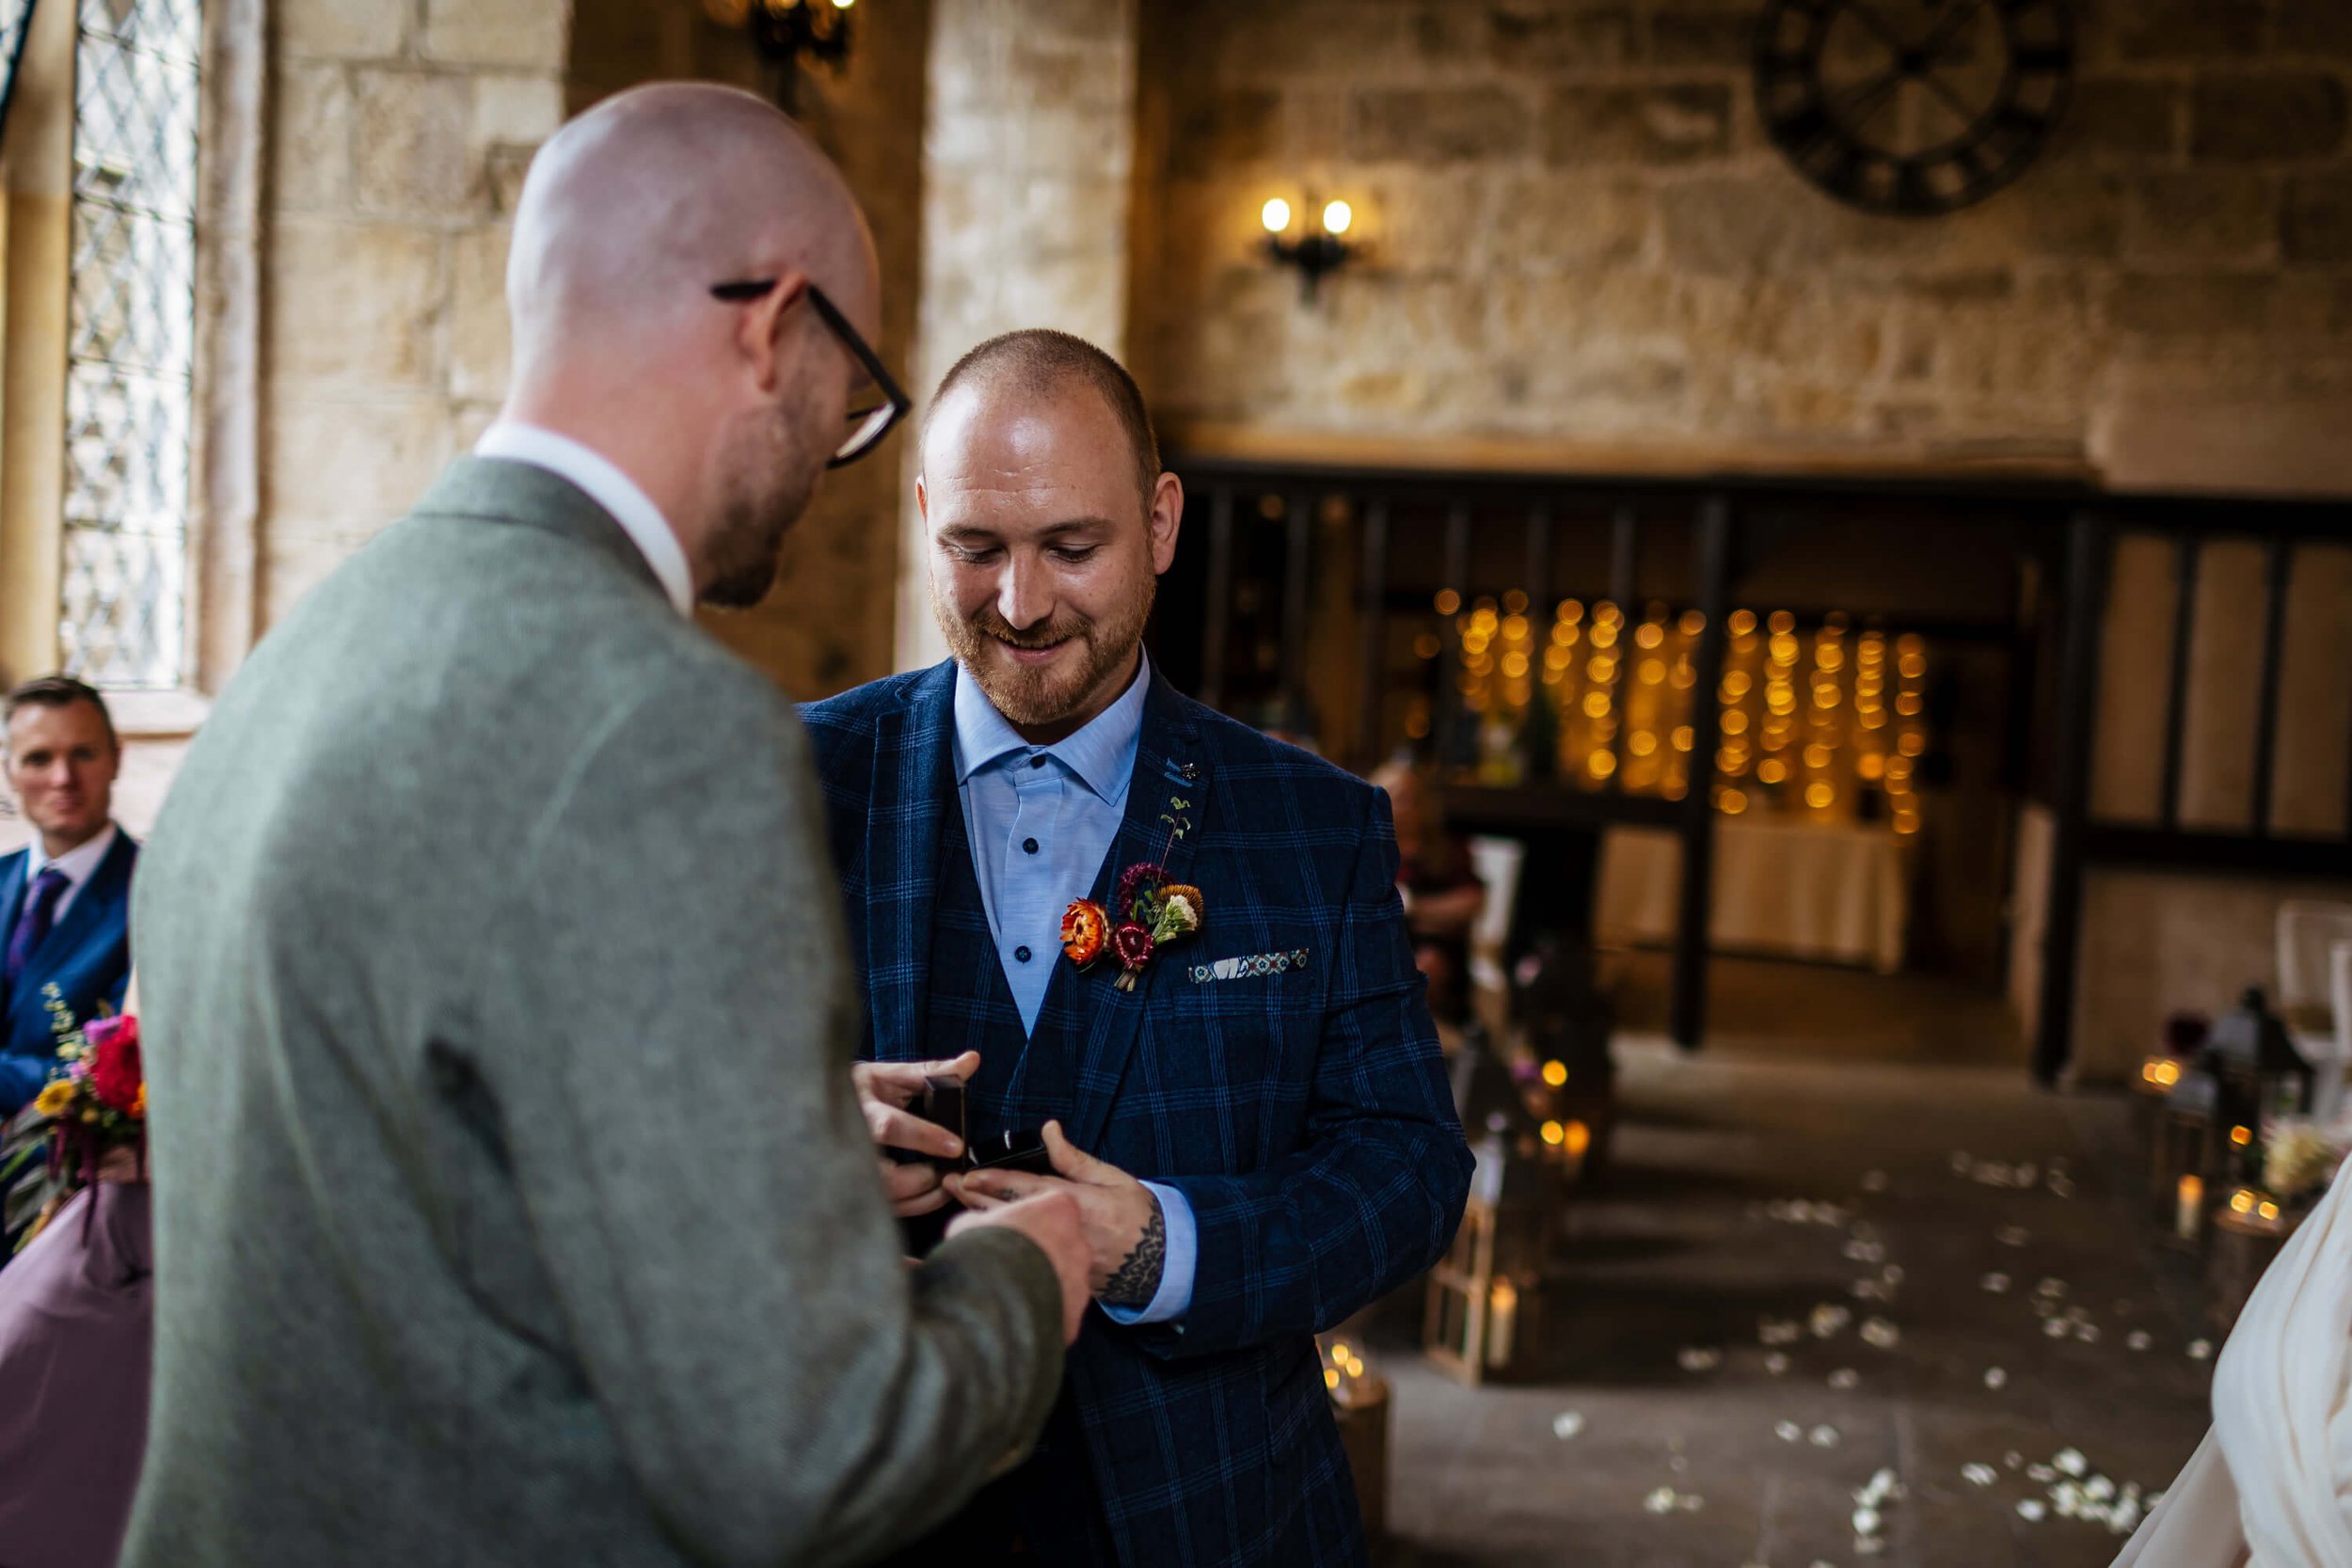 Best man presents the wedding rings to the groom